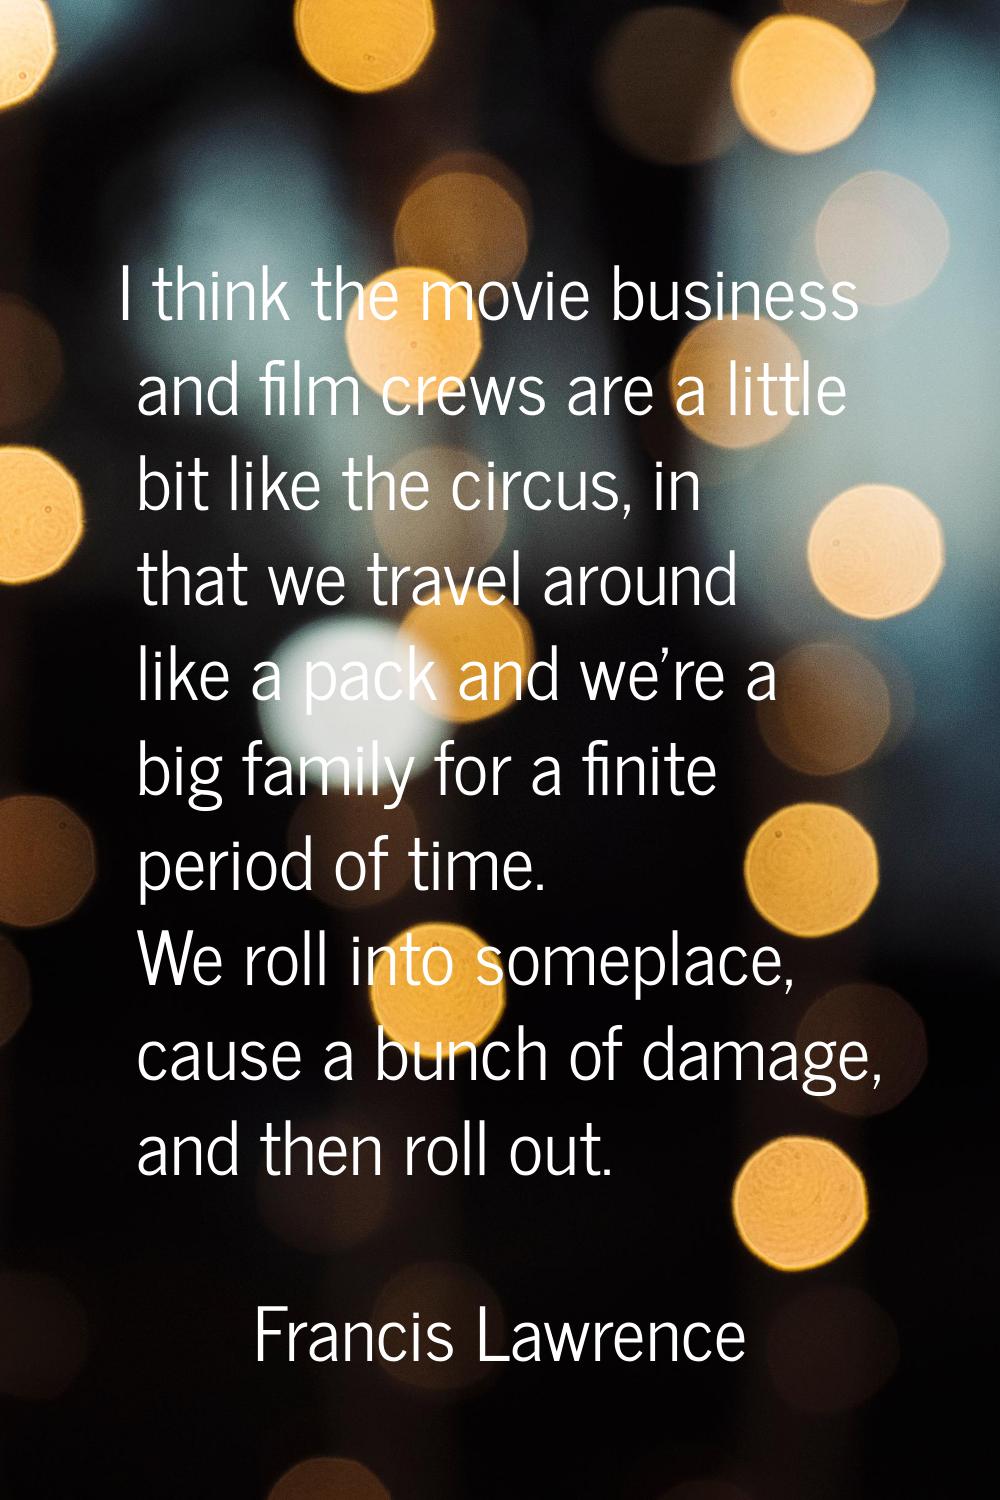 I think the movie business and film crews are a little bit like the circus, in that we travel aroun